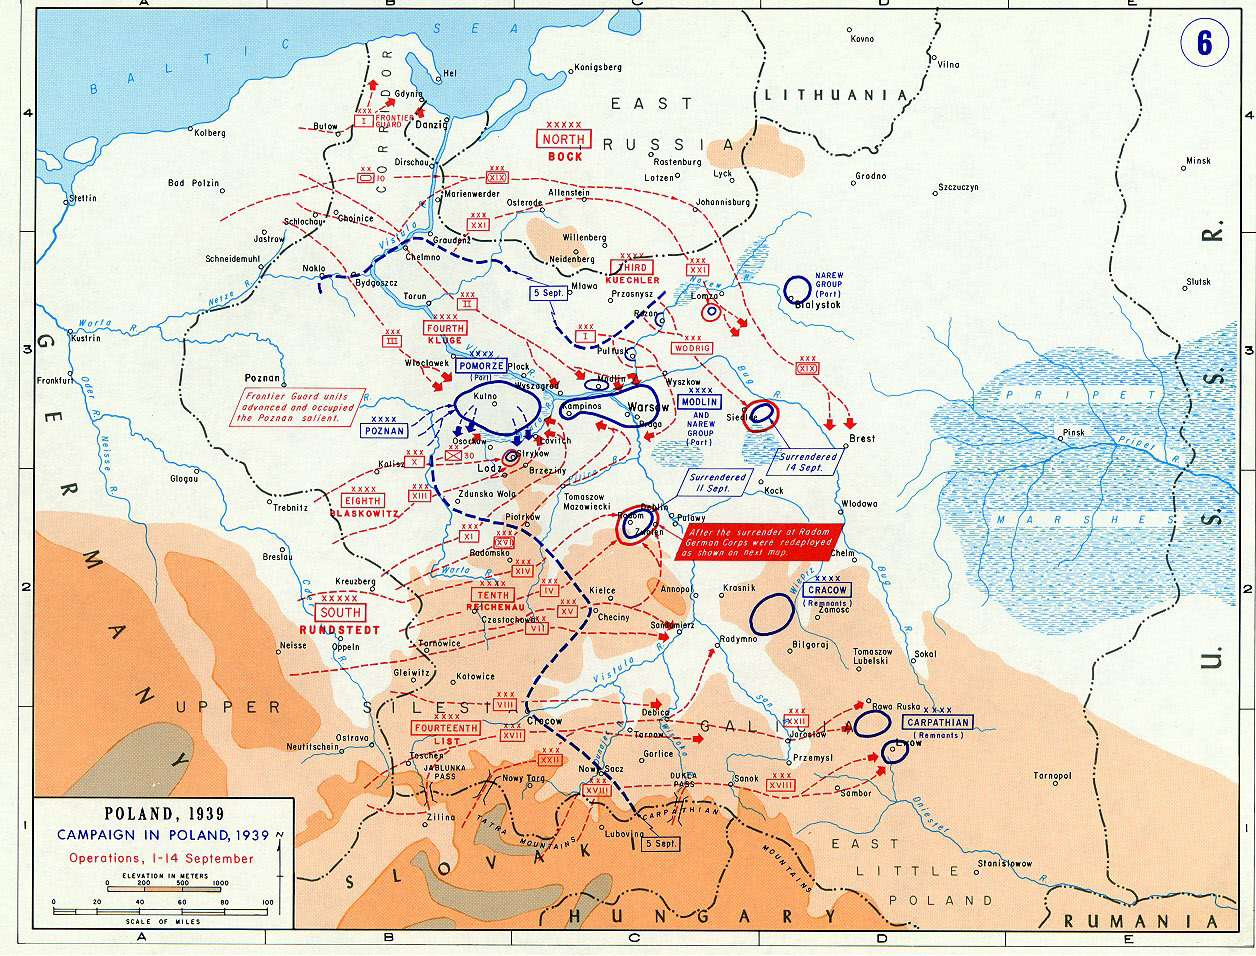 Operations in Poland, 1-14 September 1939 